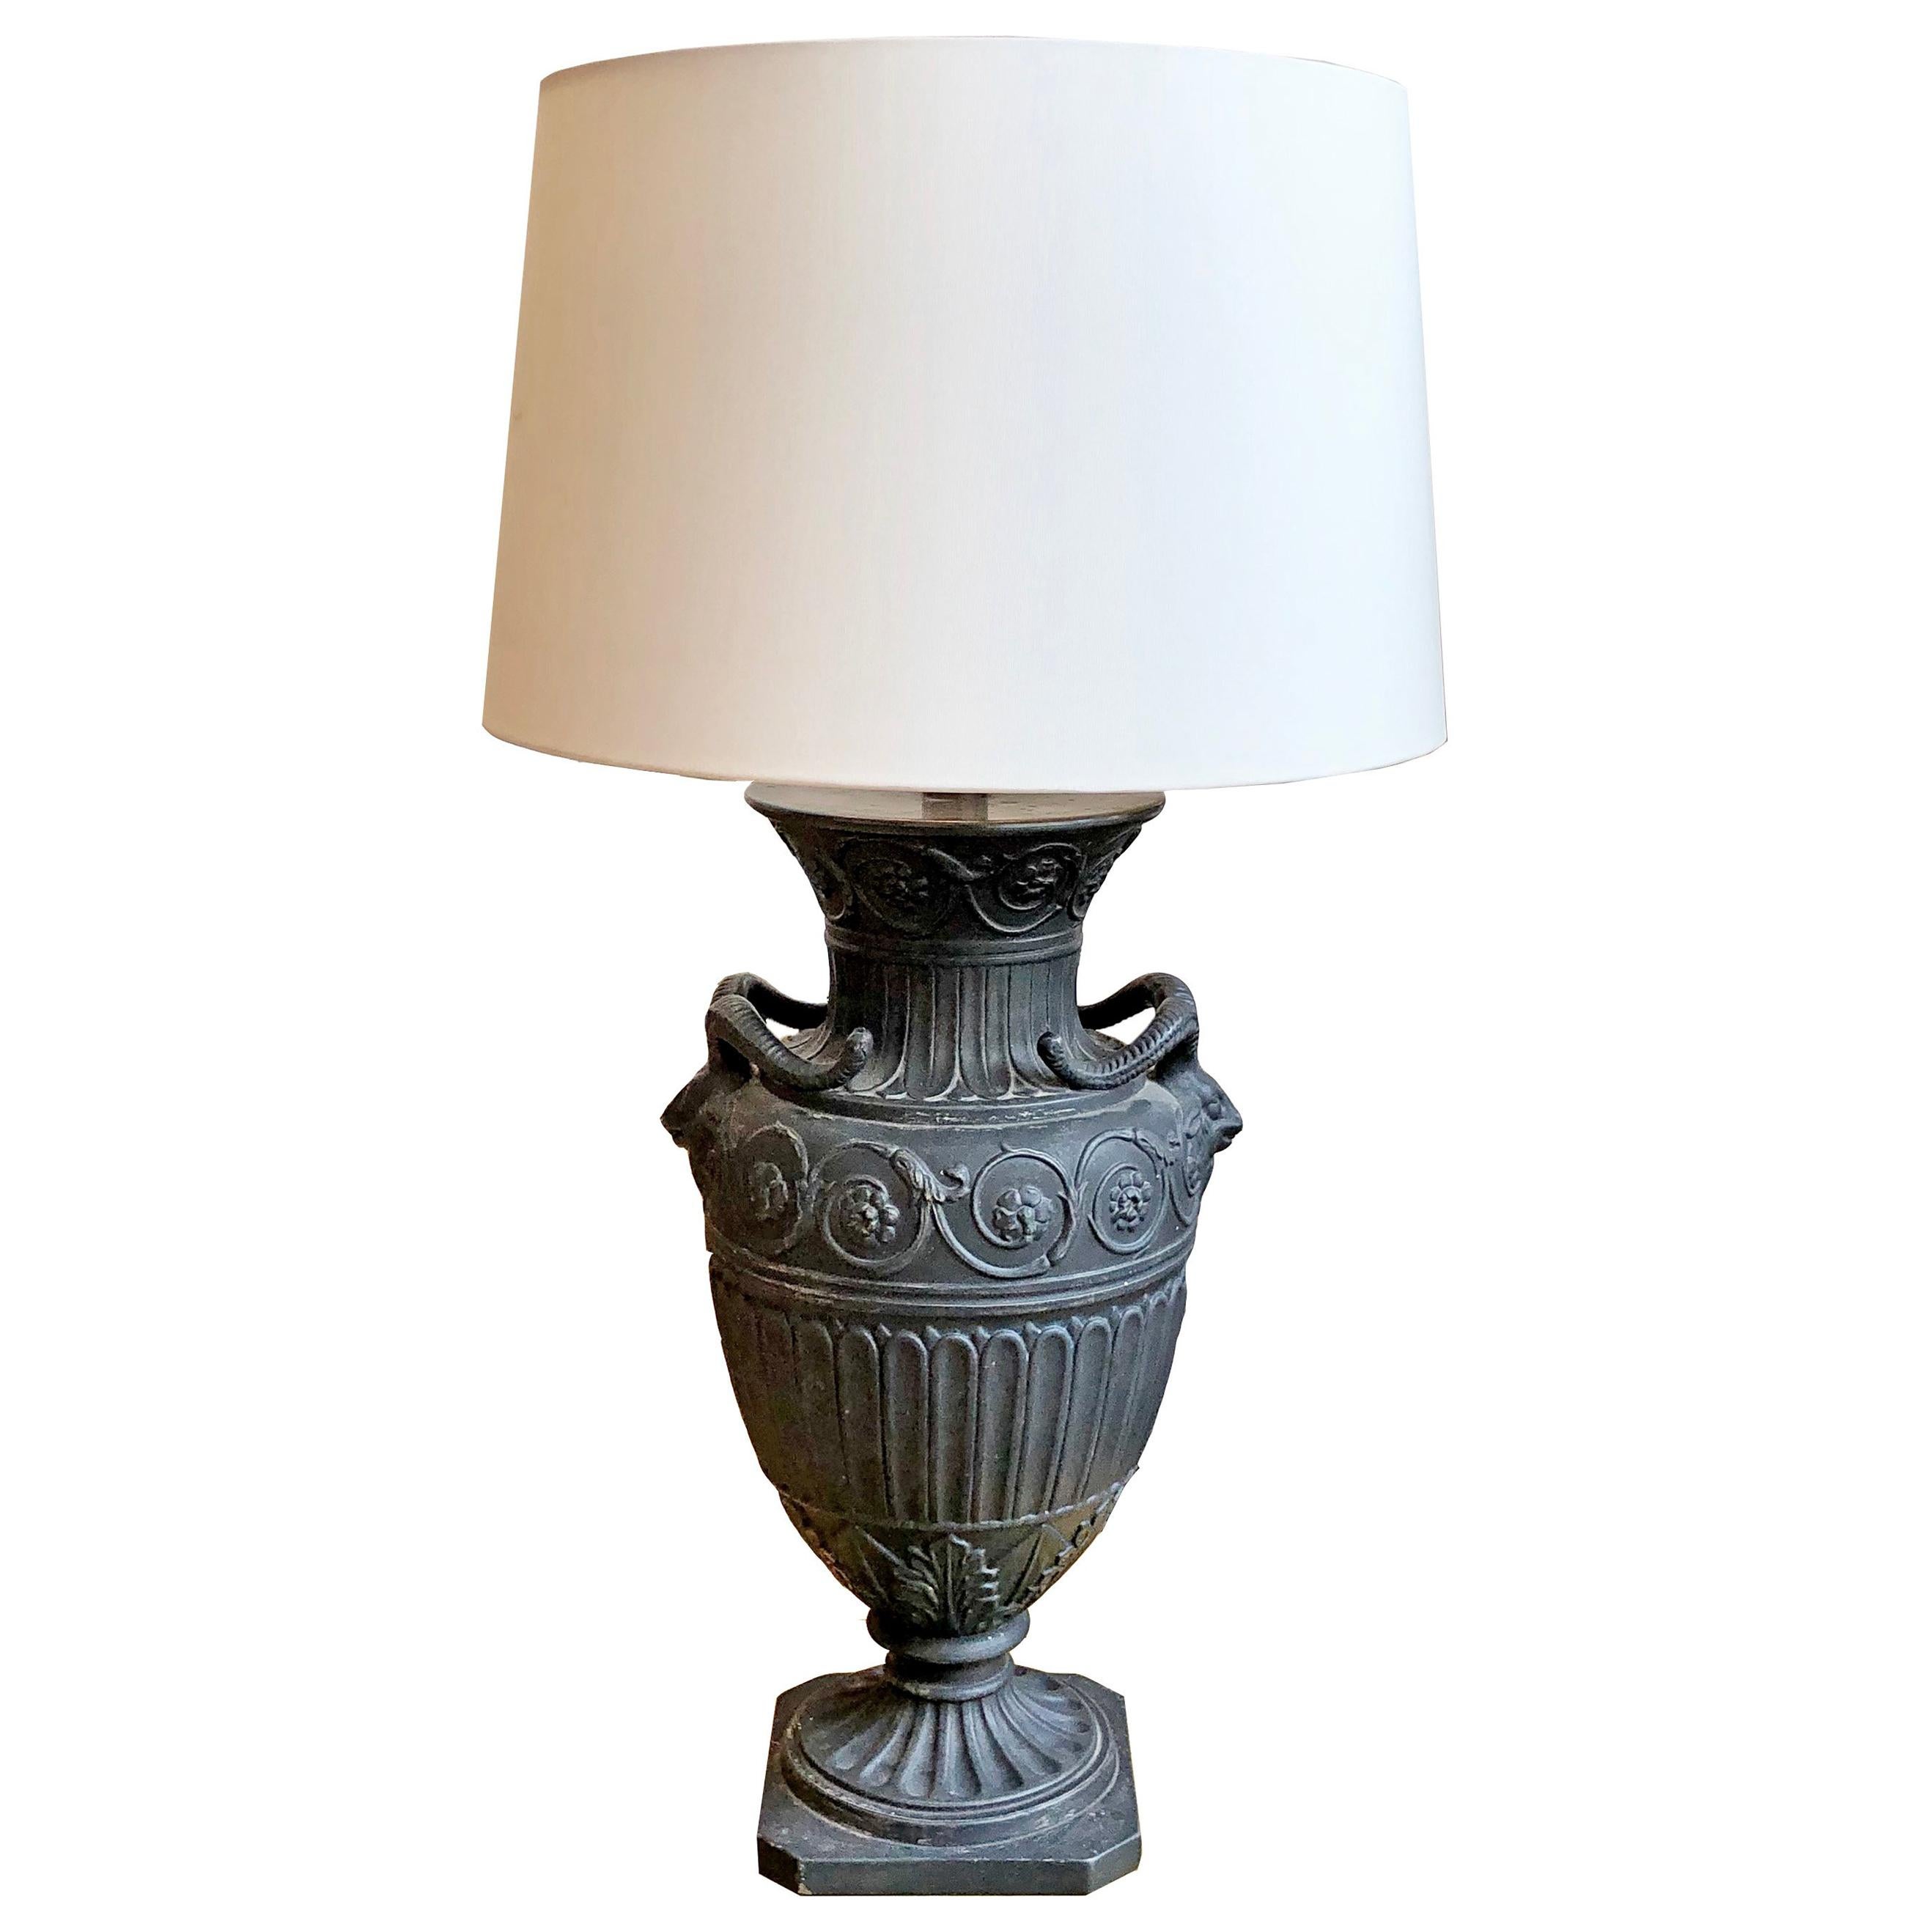 19th Century Basalt Style Amphora Table Lamp For Sale